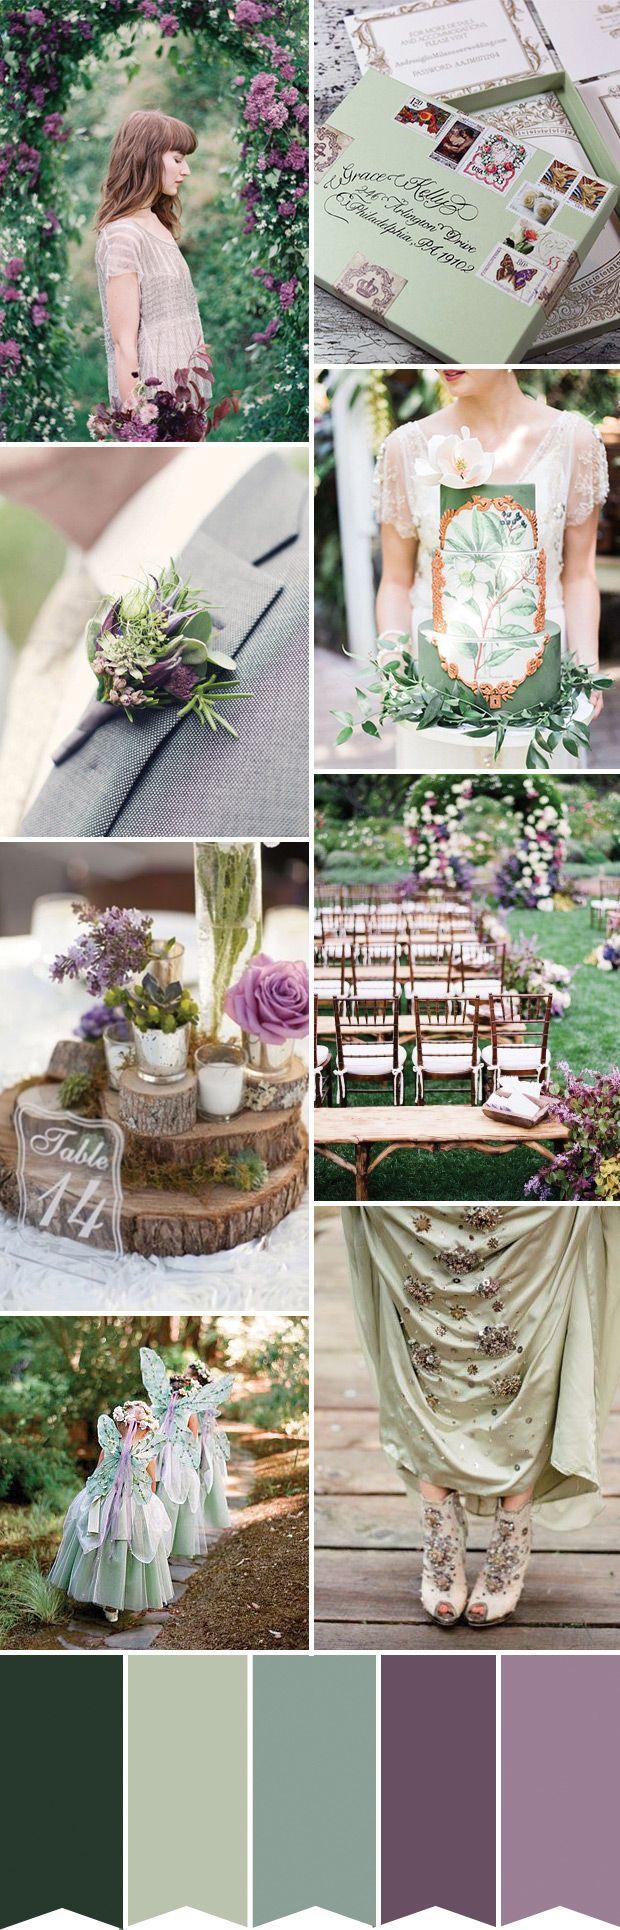 Wedding - Happily Ever After - Fairytale Purple And Green Wedding Inspiration